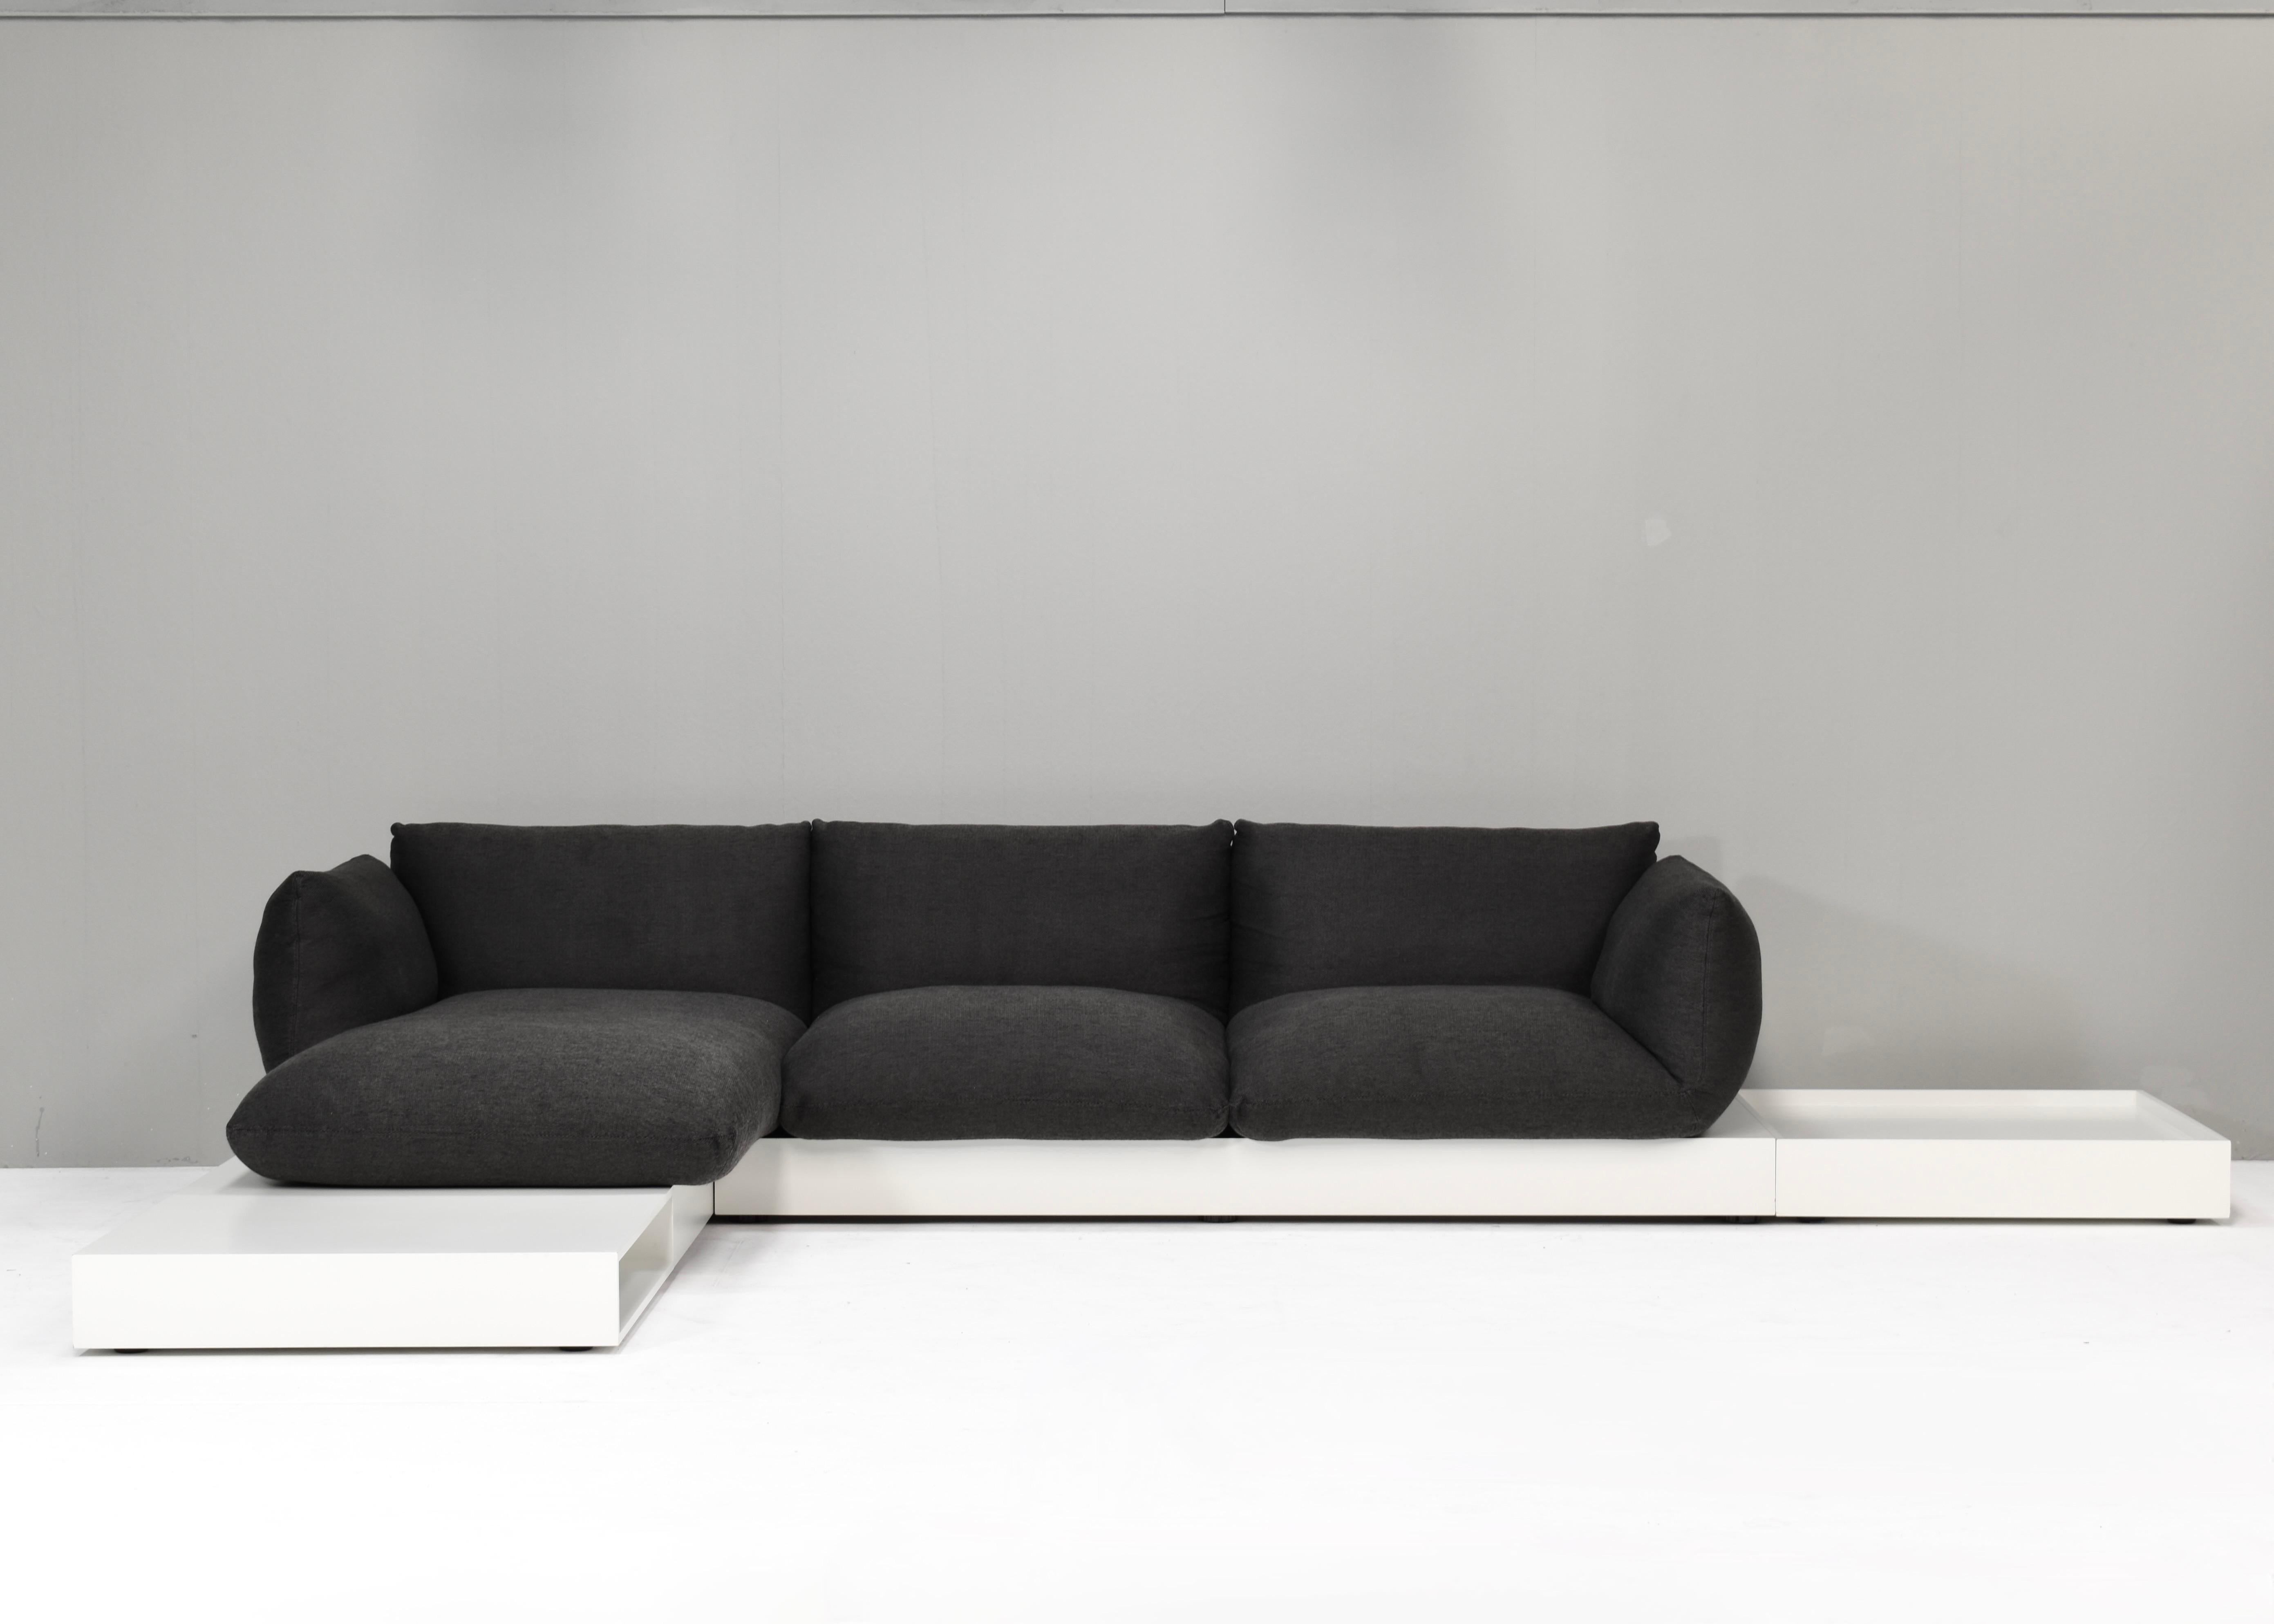 Contemporary Original COR JALIS Sofa by Jehs & Laub with wood base and coffee table, Germany  For Sale